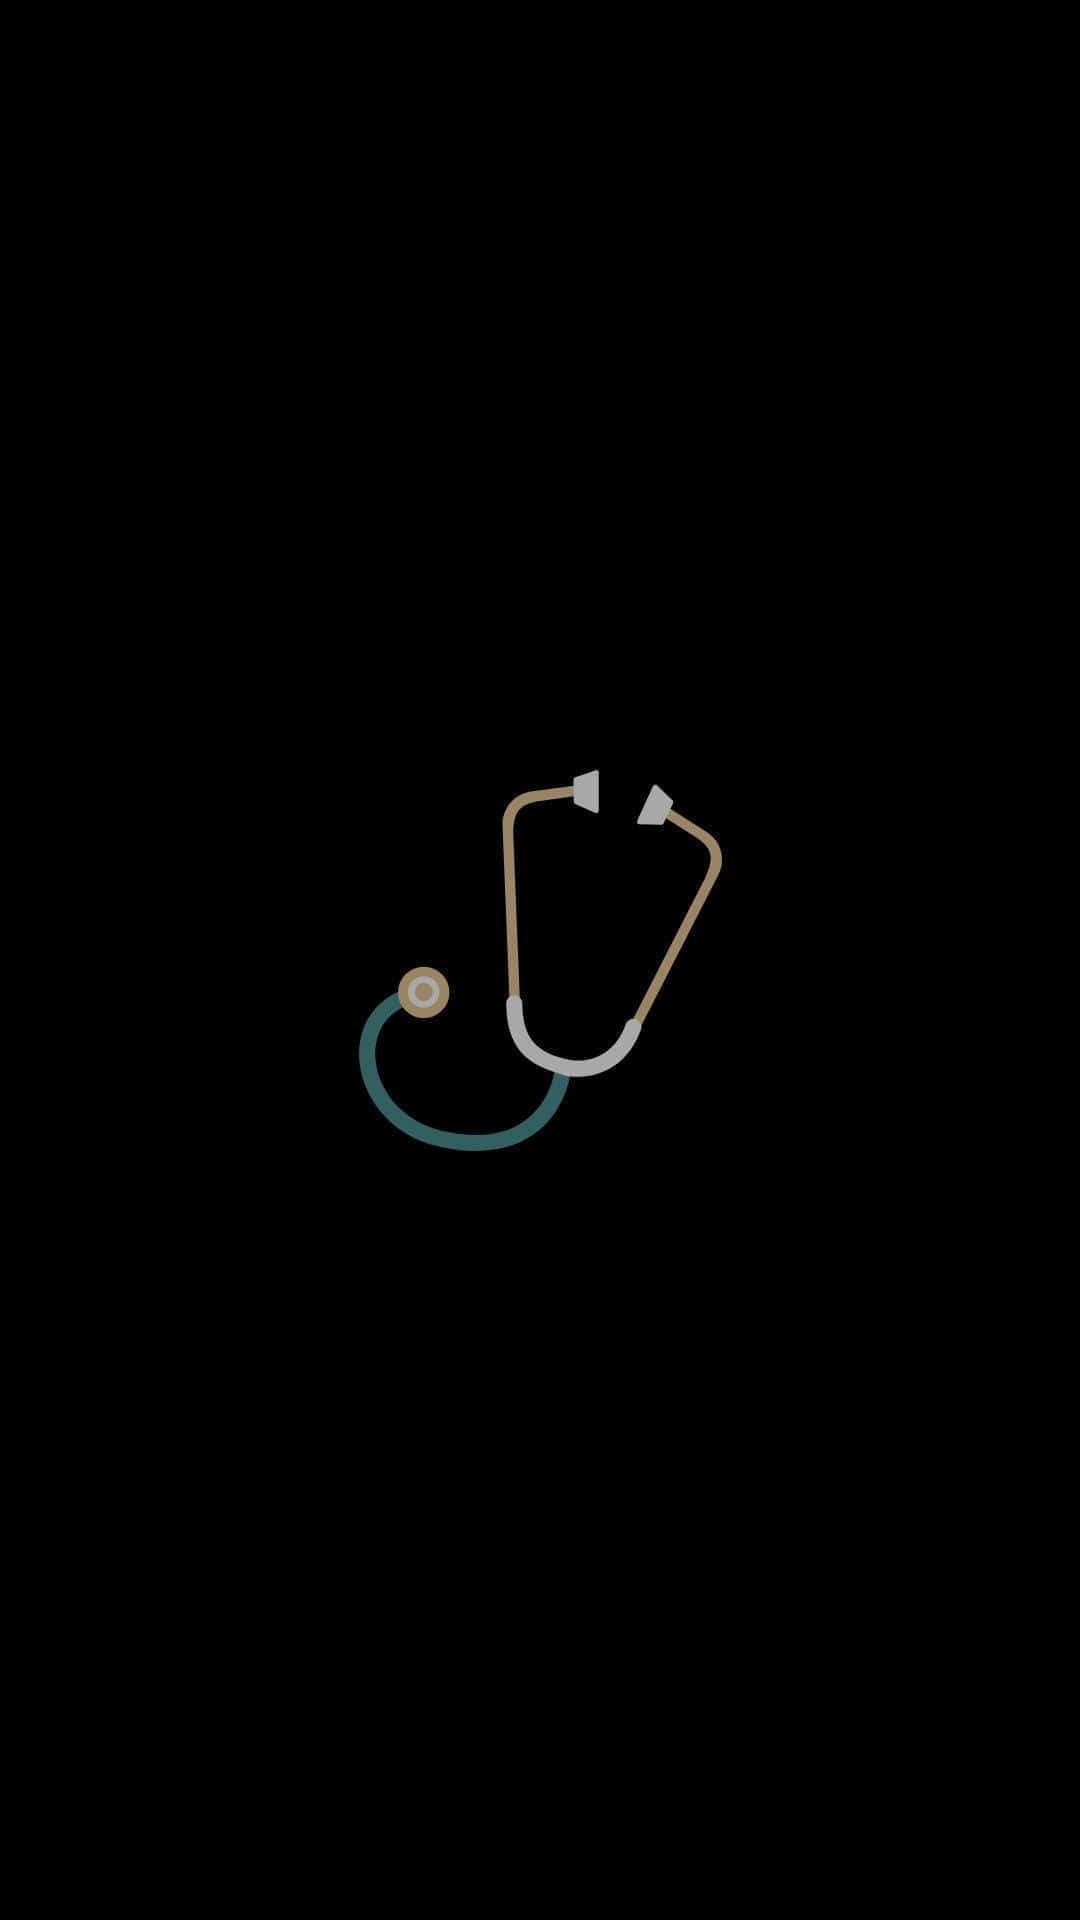 Download A Stethoscope On A Black Background | Wallpapers.com